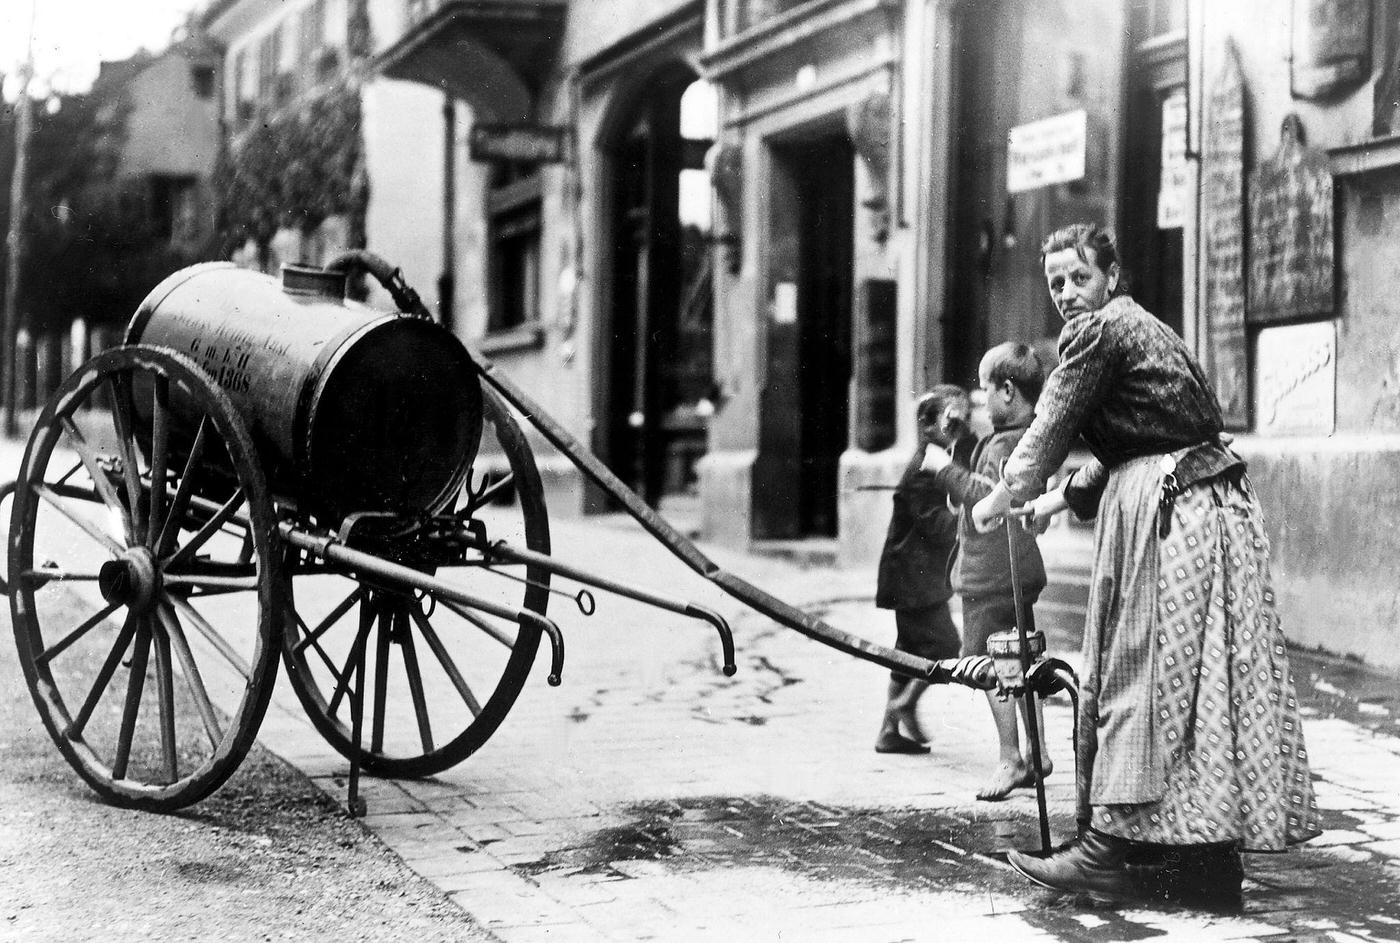 Woman refilling water container, Munich, Germany, around 1900.